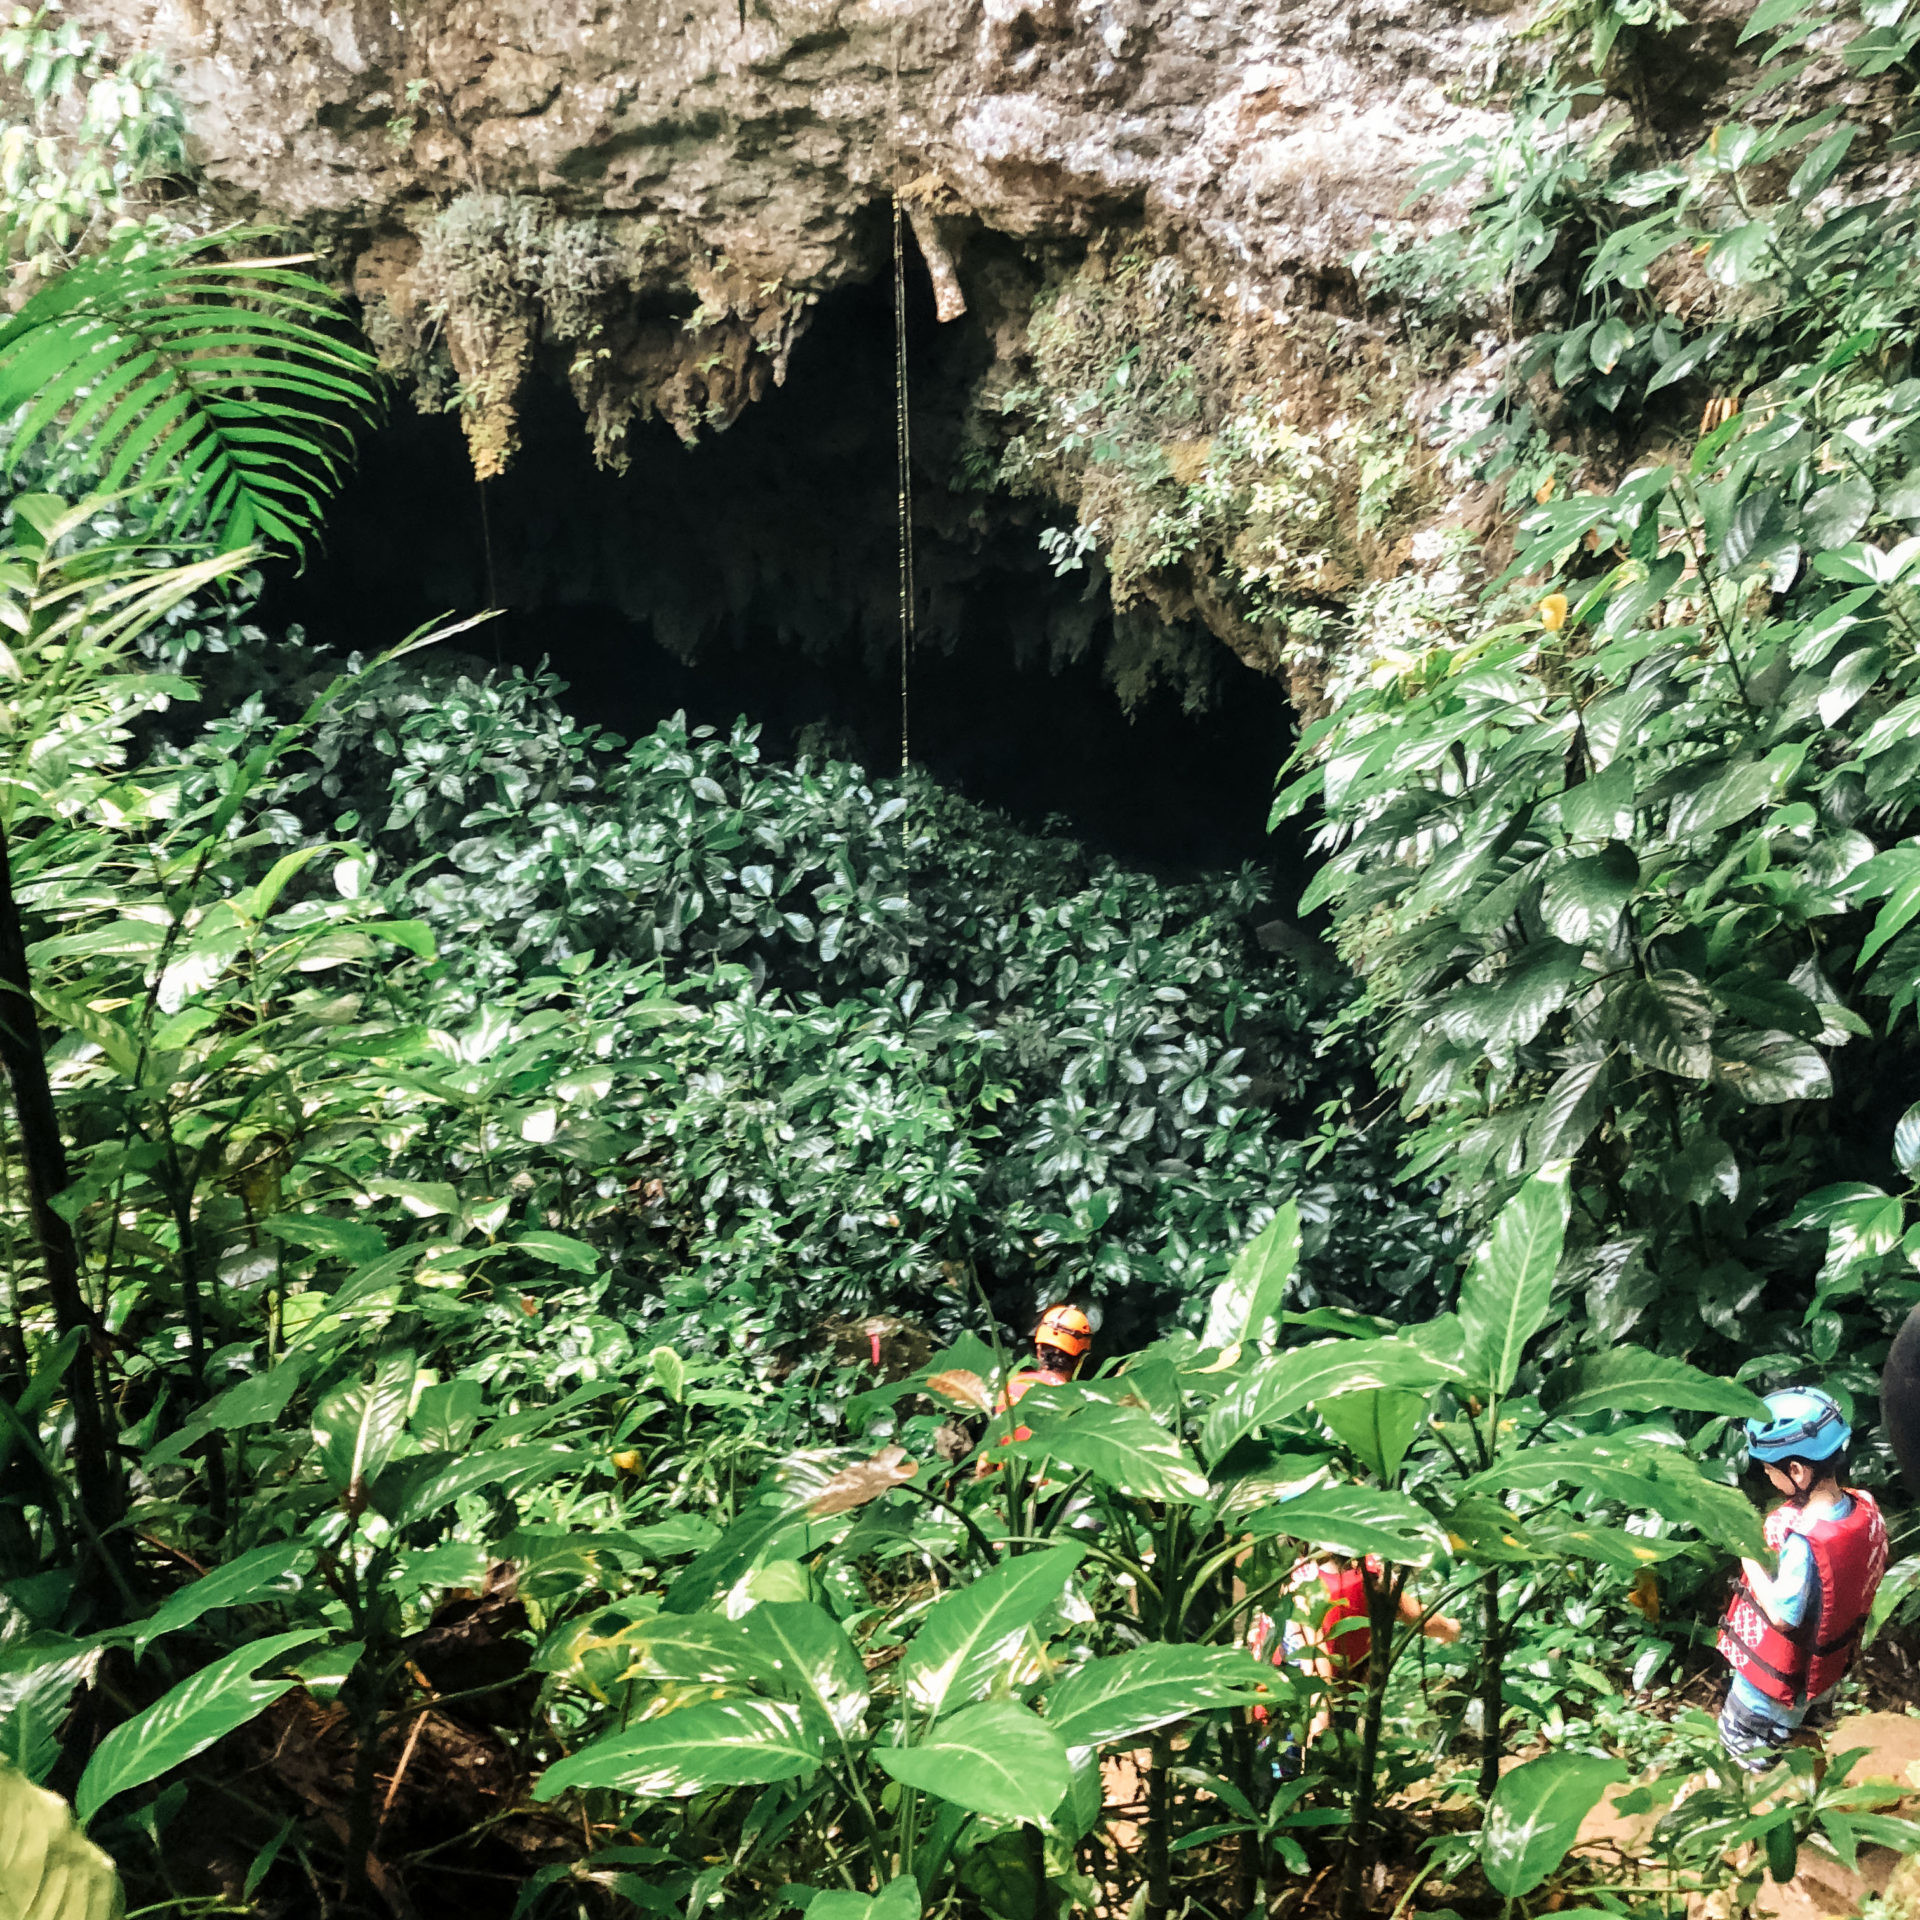 Lisa Breckenridge exploring caves with family in Belize